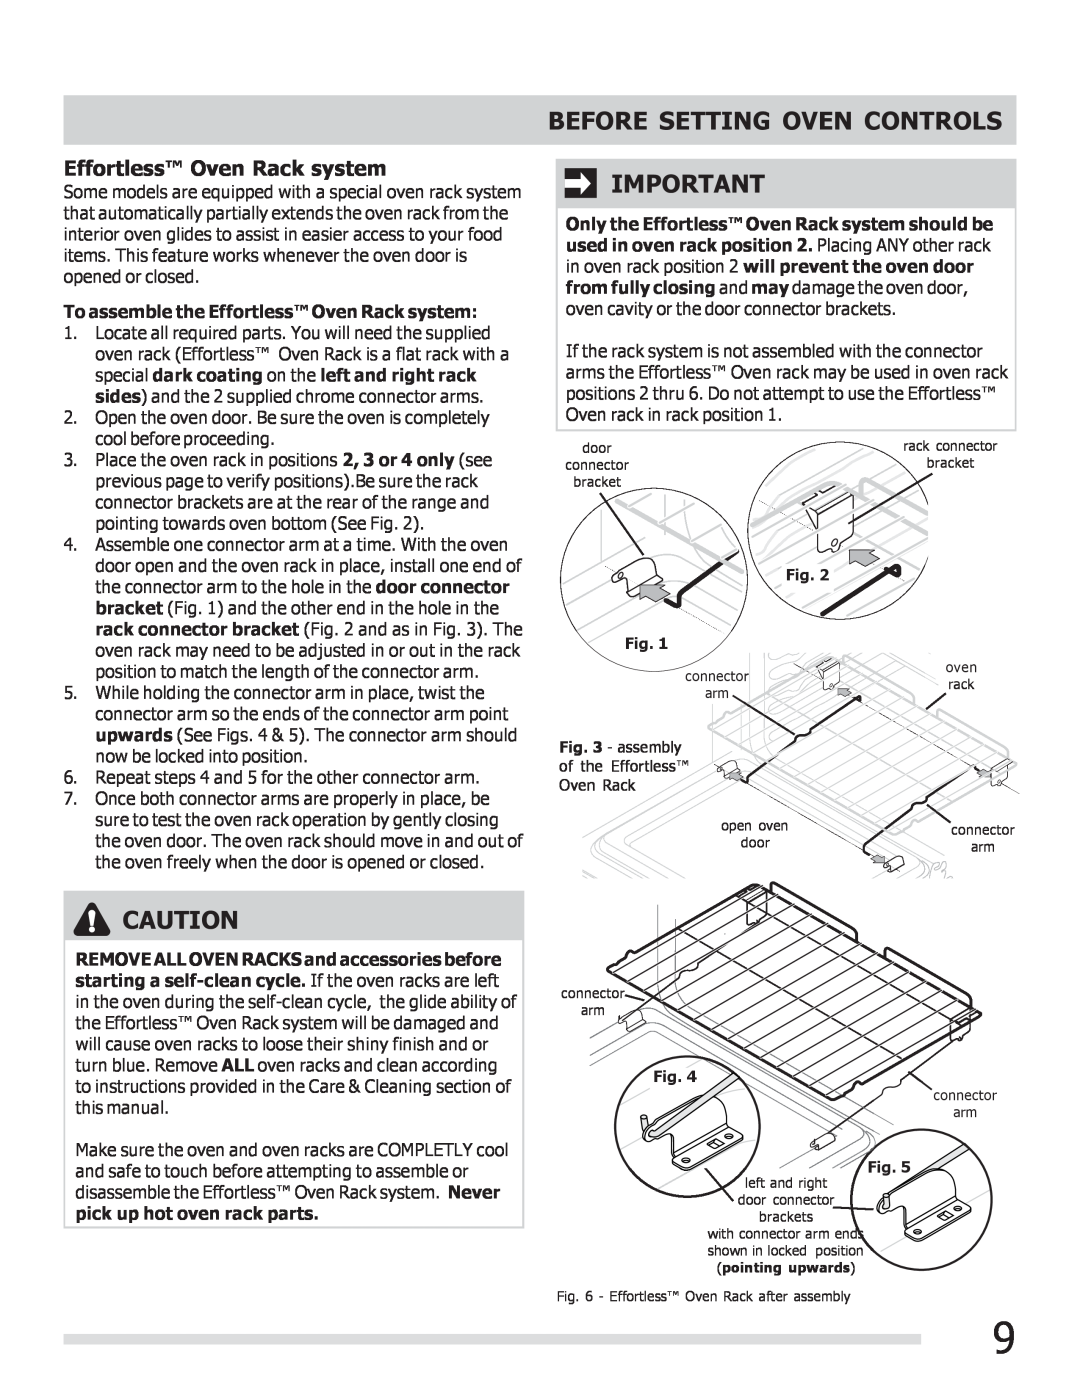 Frigidaire FGGF3056KF important safety instructions Effortless Oven Rack system, Before Setting Oven Controls 